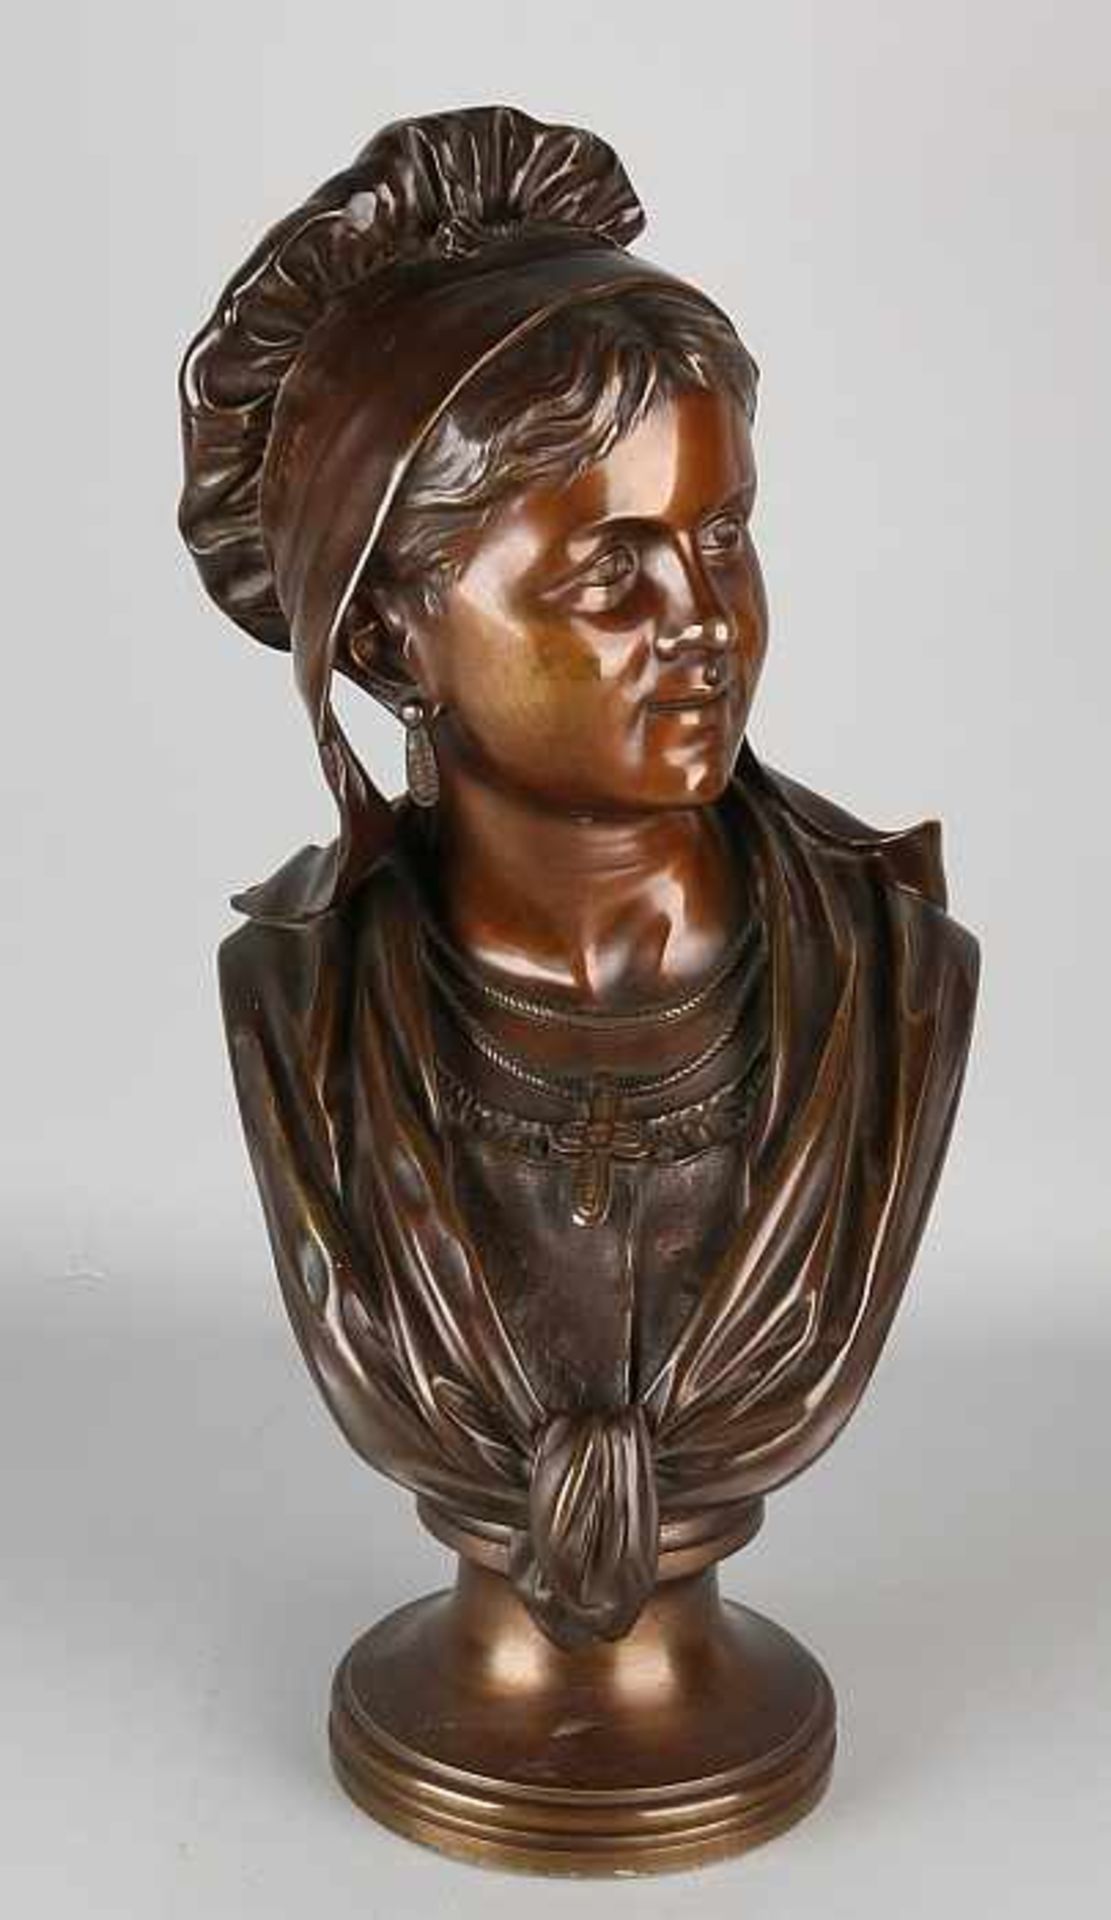 Large antique bronze bust by Leon Spilliart. 1881 - 1946. French farmers girl. Circa 1900.